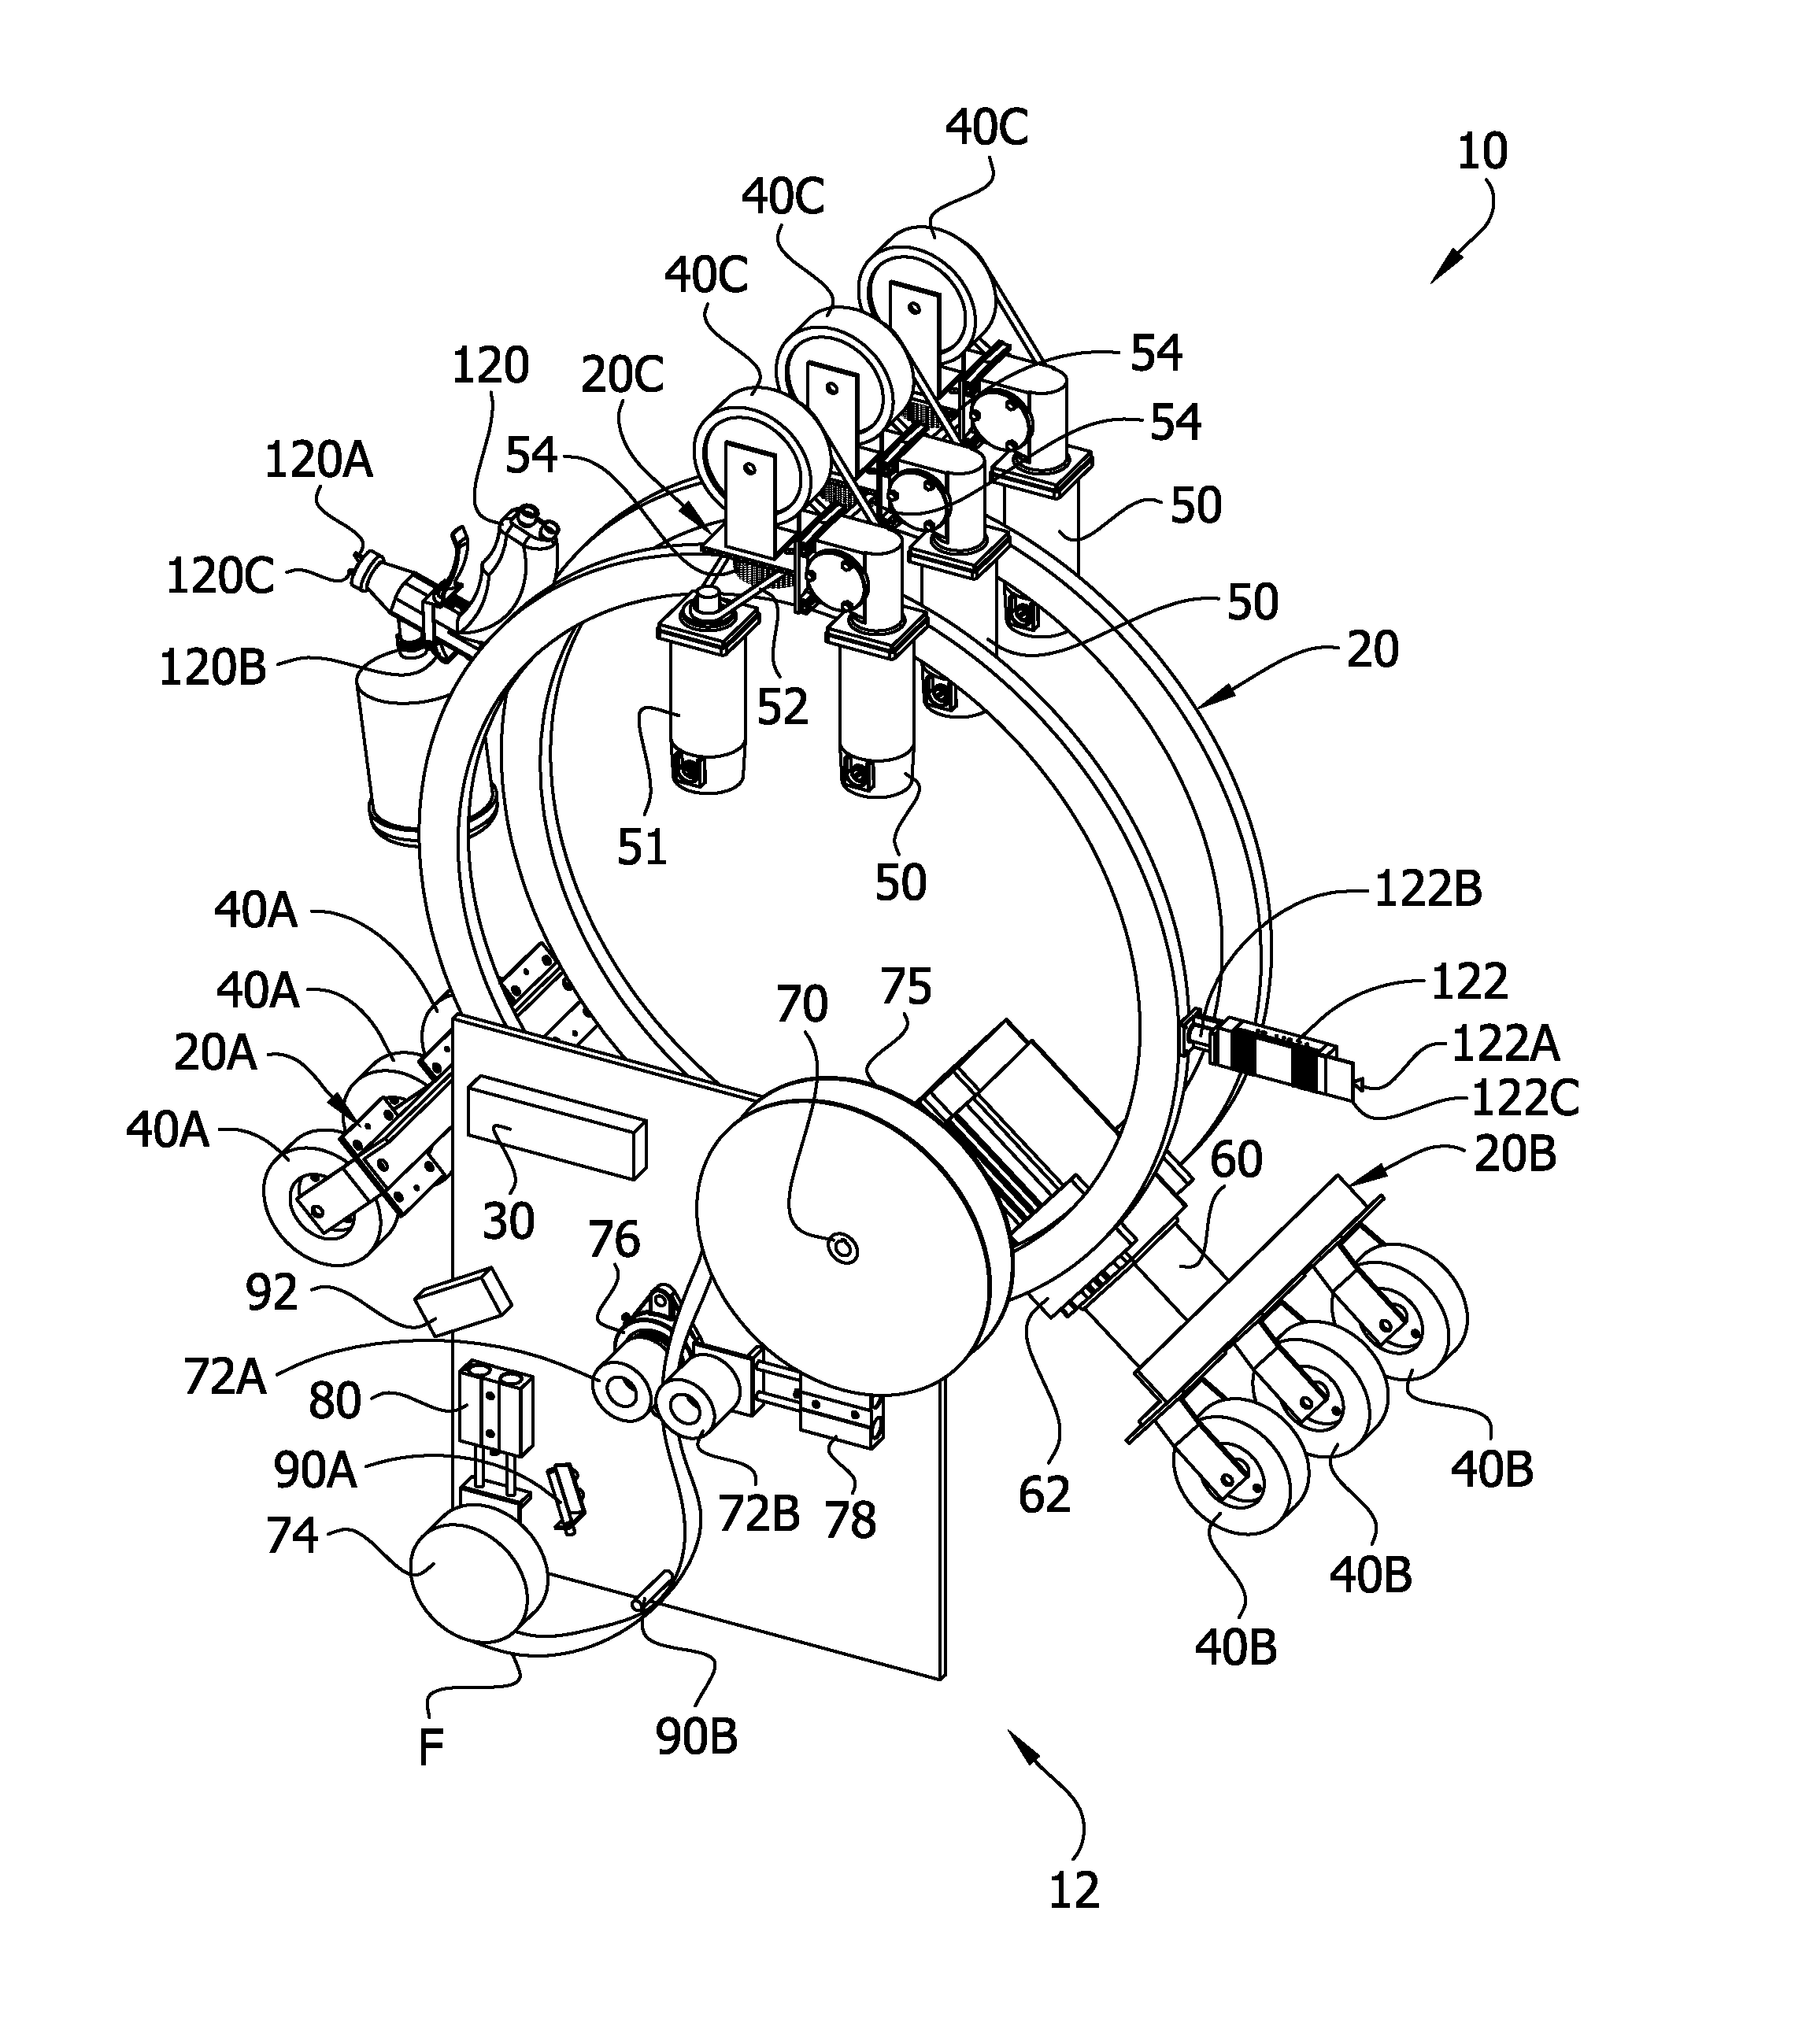 Systems and methods for reinforcing a pipe using fiber bundles and fiber bundle ribbon